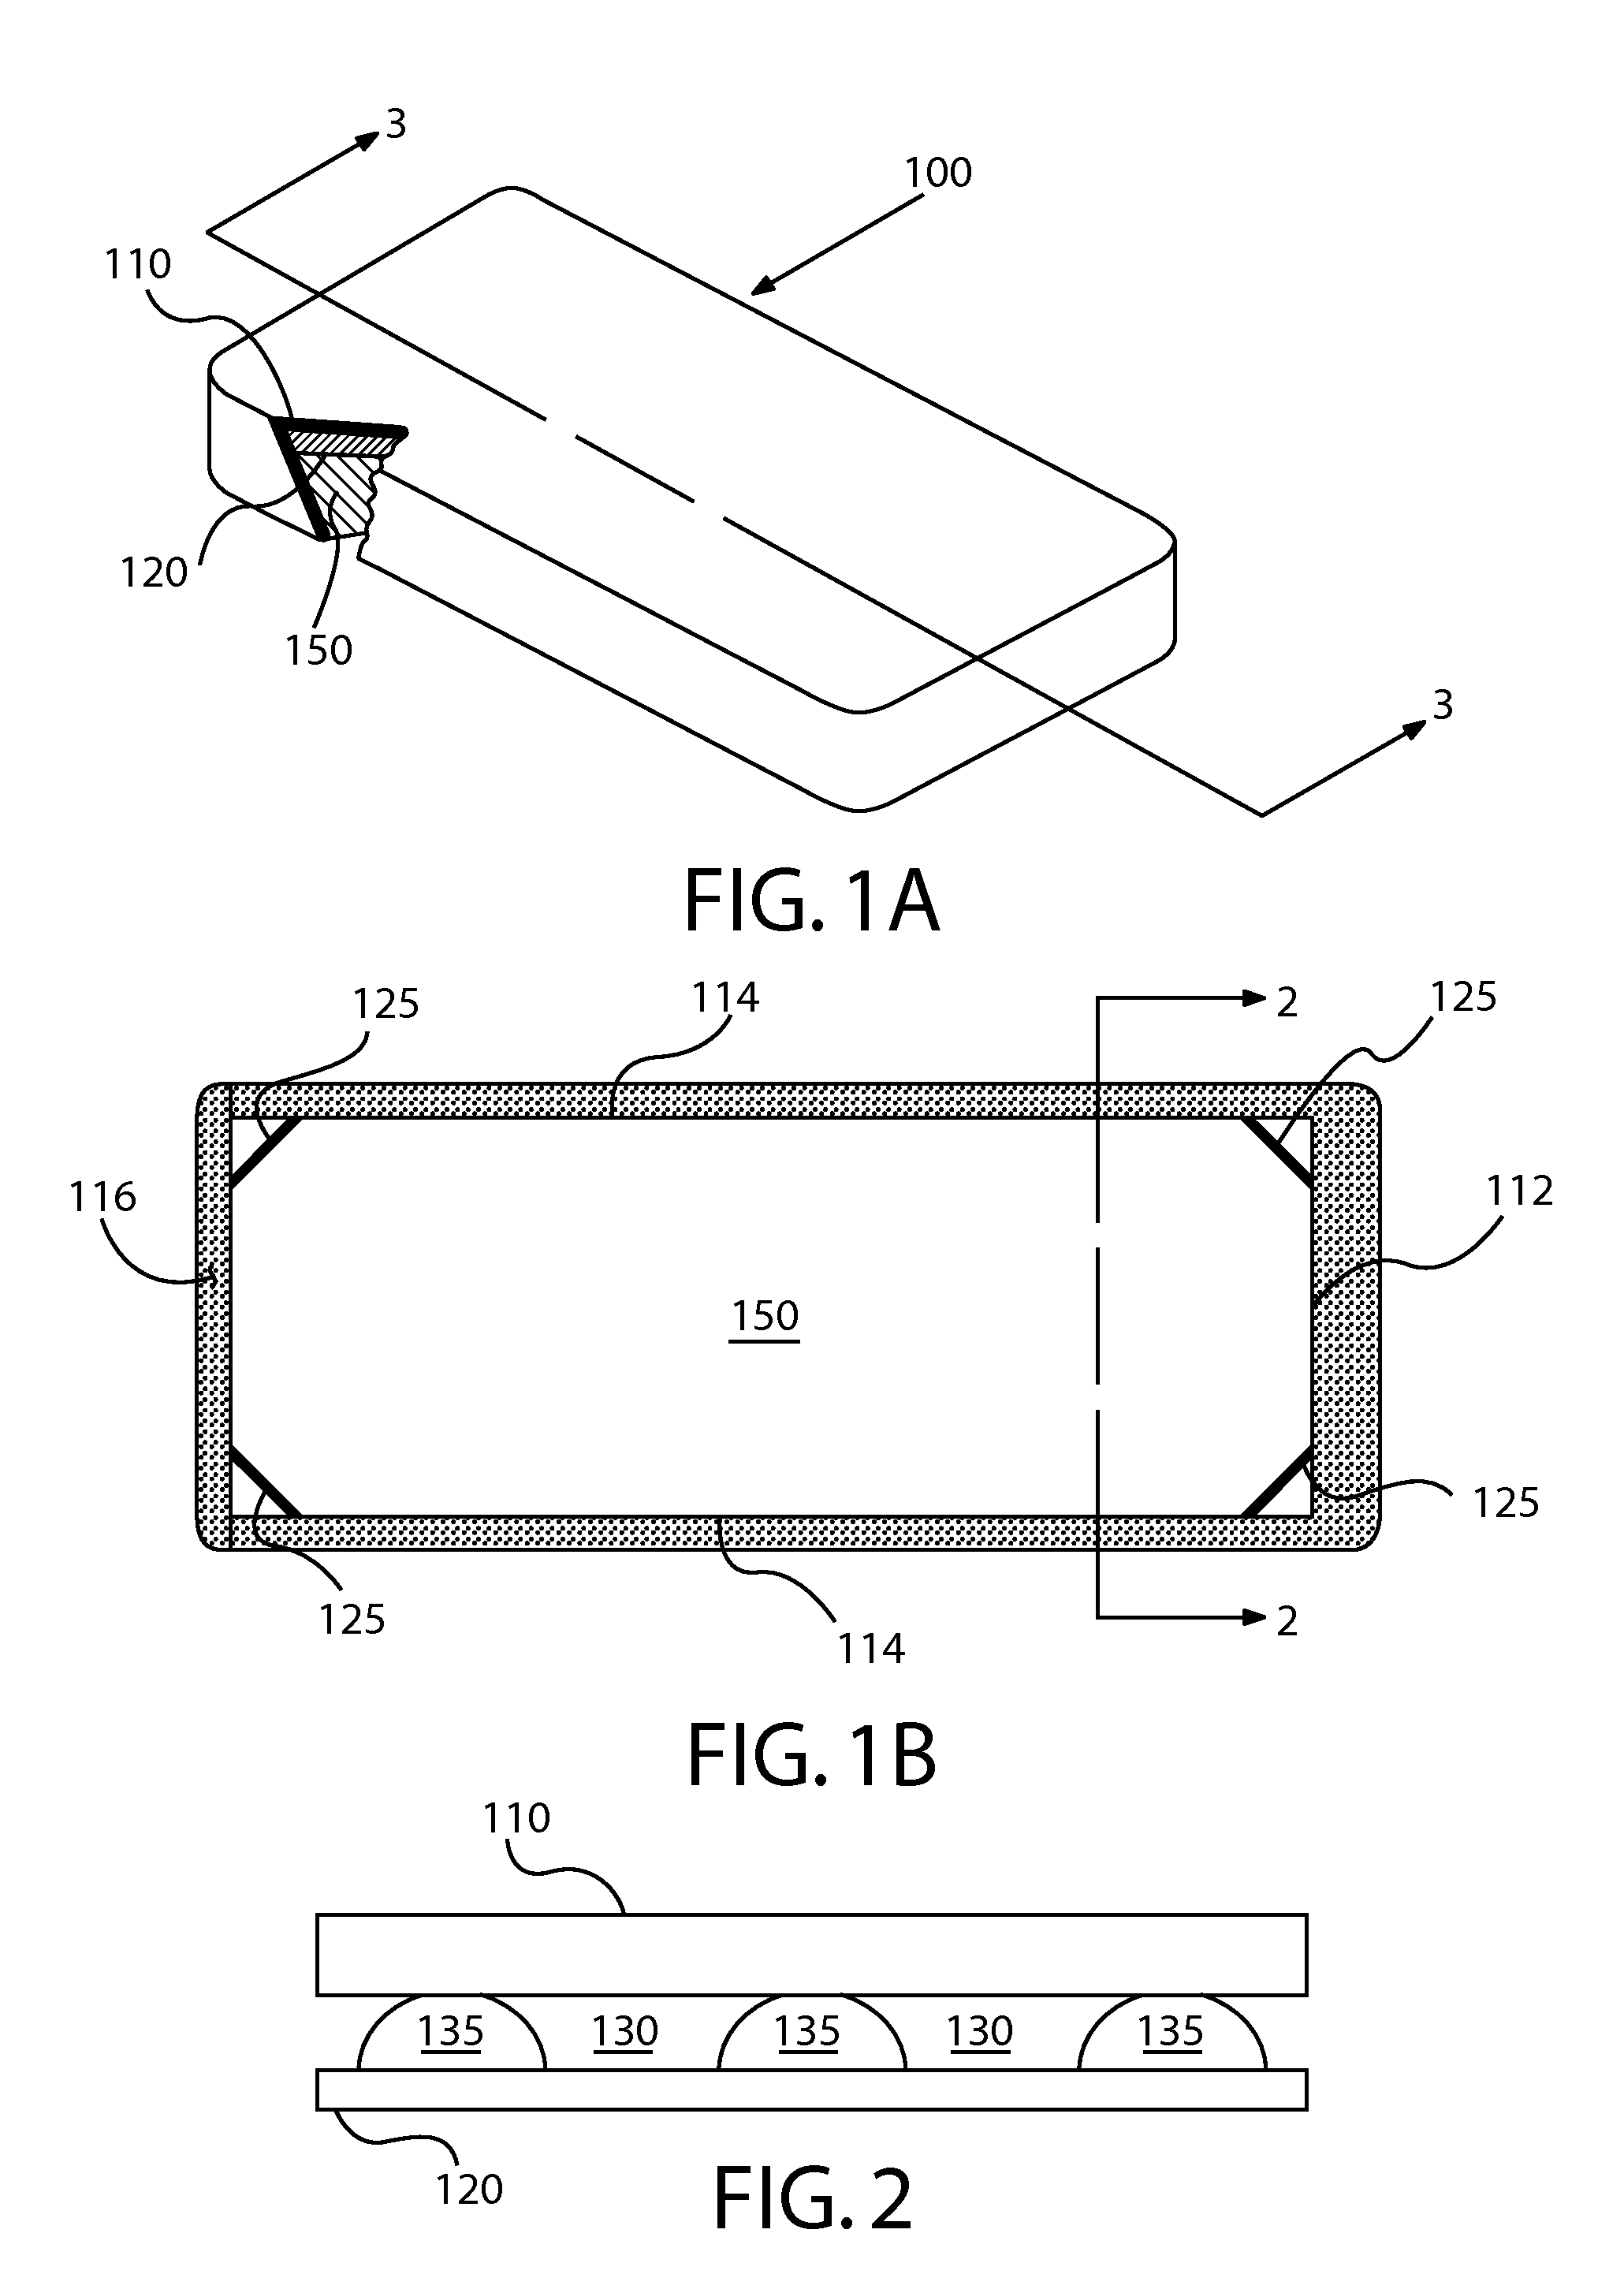 Methods and apparatuses for low-air-loss (LAL) coverlets and airflow units for coverlets